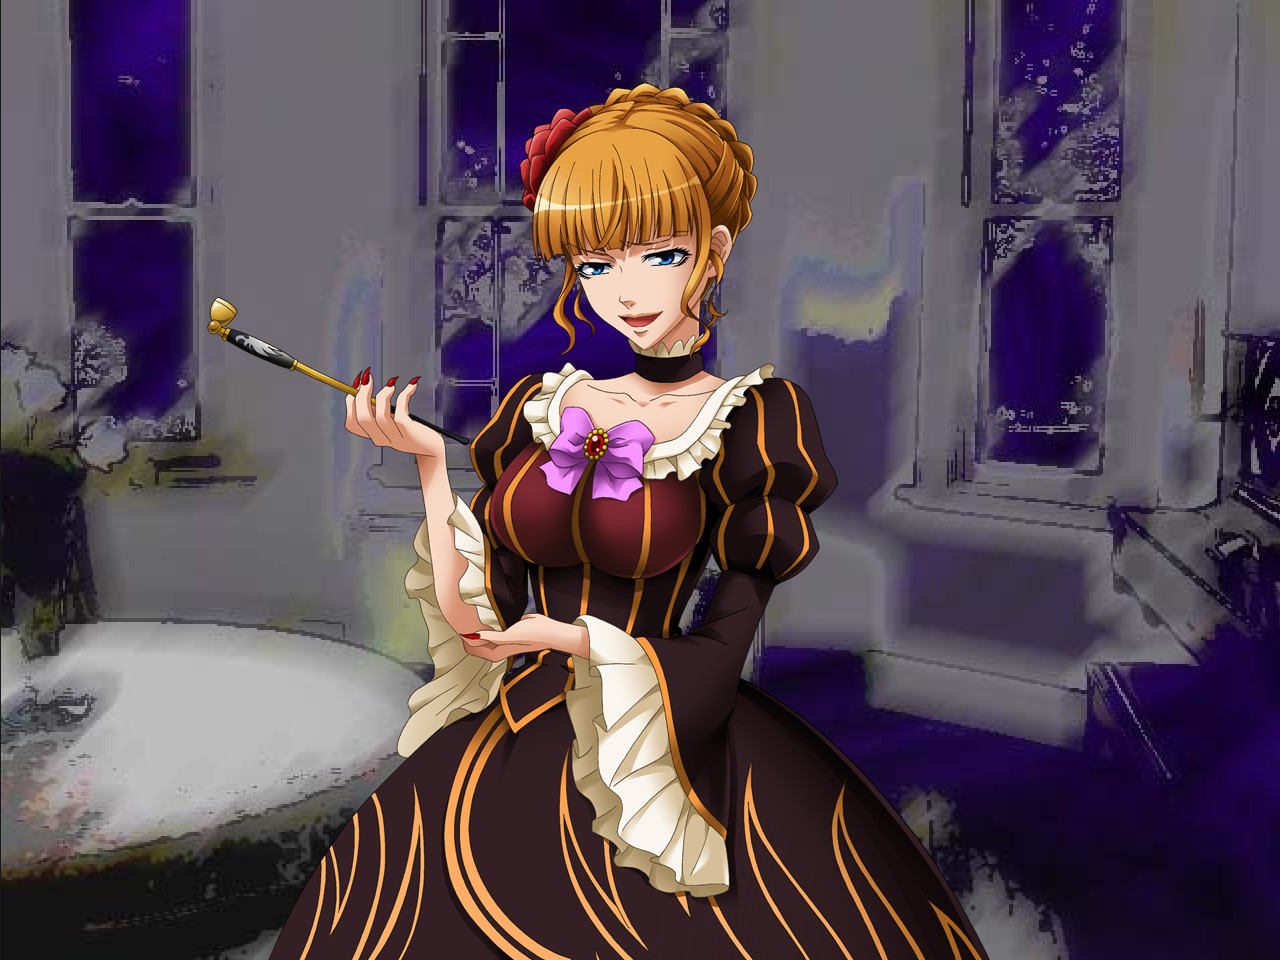 umineko when they cry question arcs